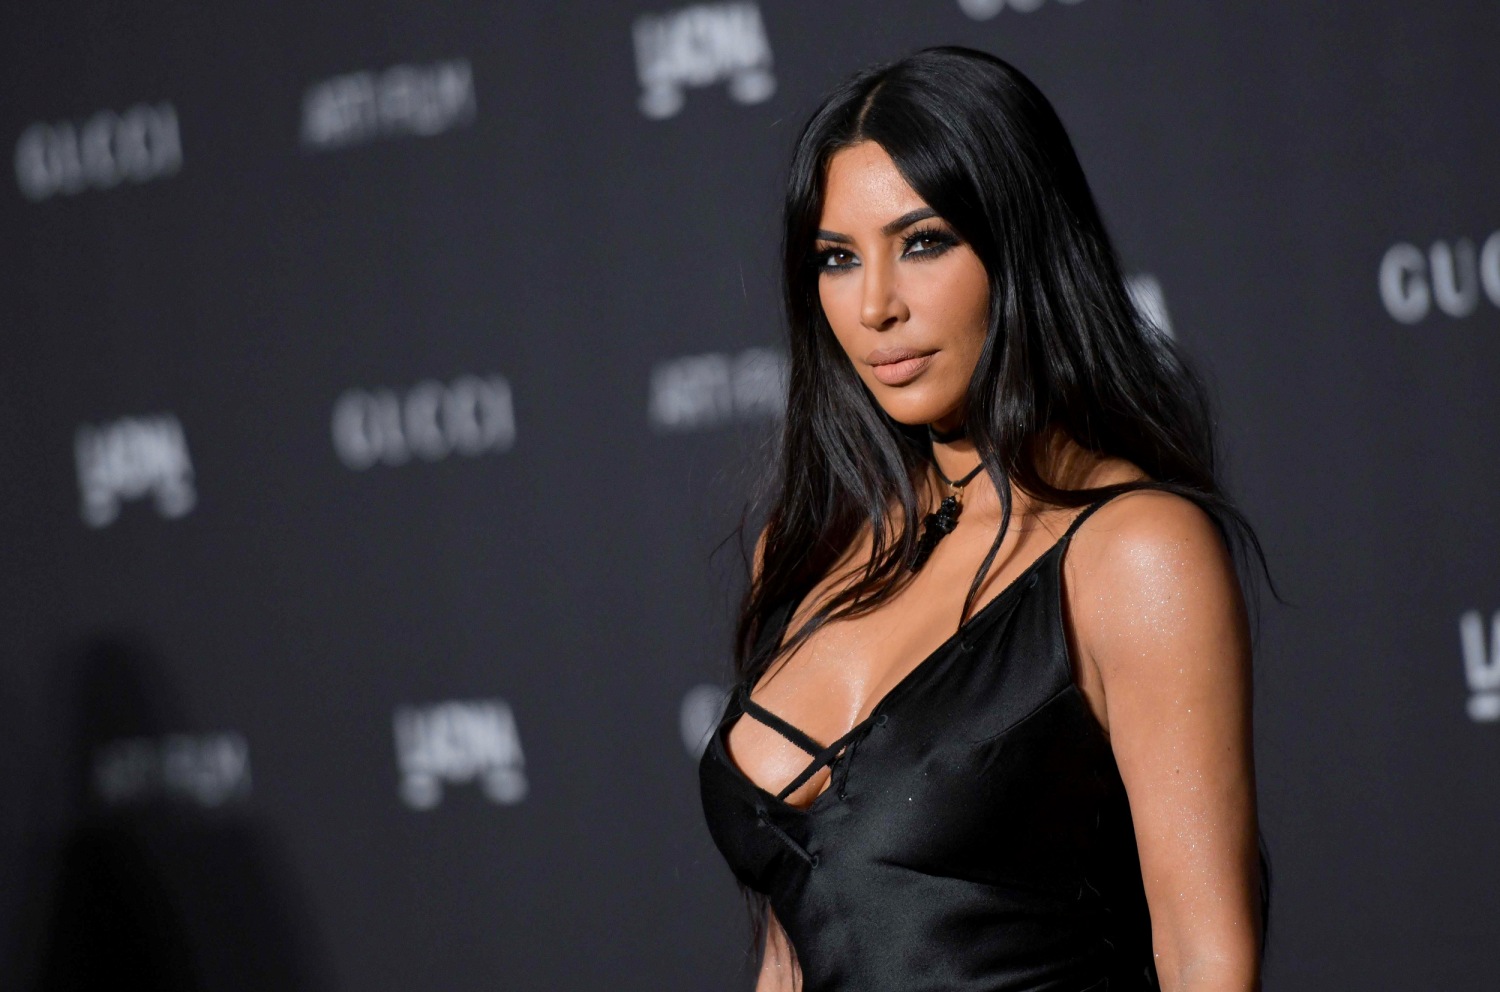 Kim Kardashian West says she was on ecstasy for first wedding and sex tape